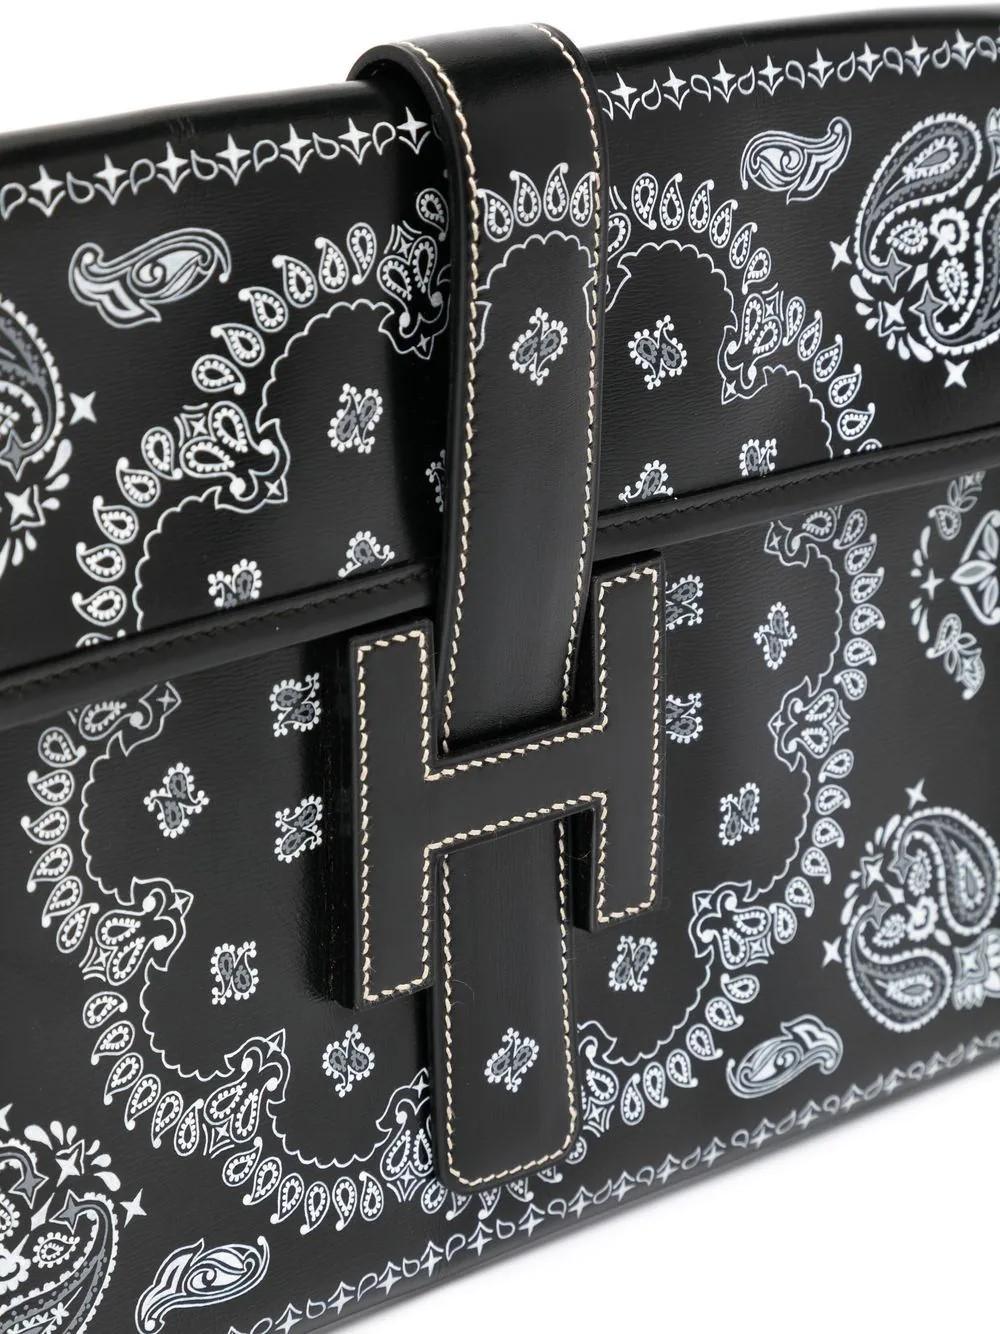 Hand-painted by our in-house artists, this is truly a one-of-a-kind piece. The bandana jige clutch is the perfect size to fit in all your essentials, yet still, be compact and practical. The H logo stands front and center and acts as a